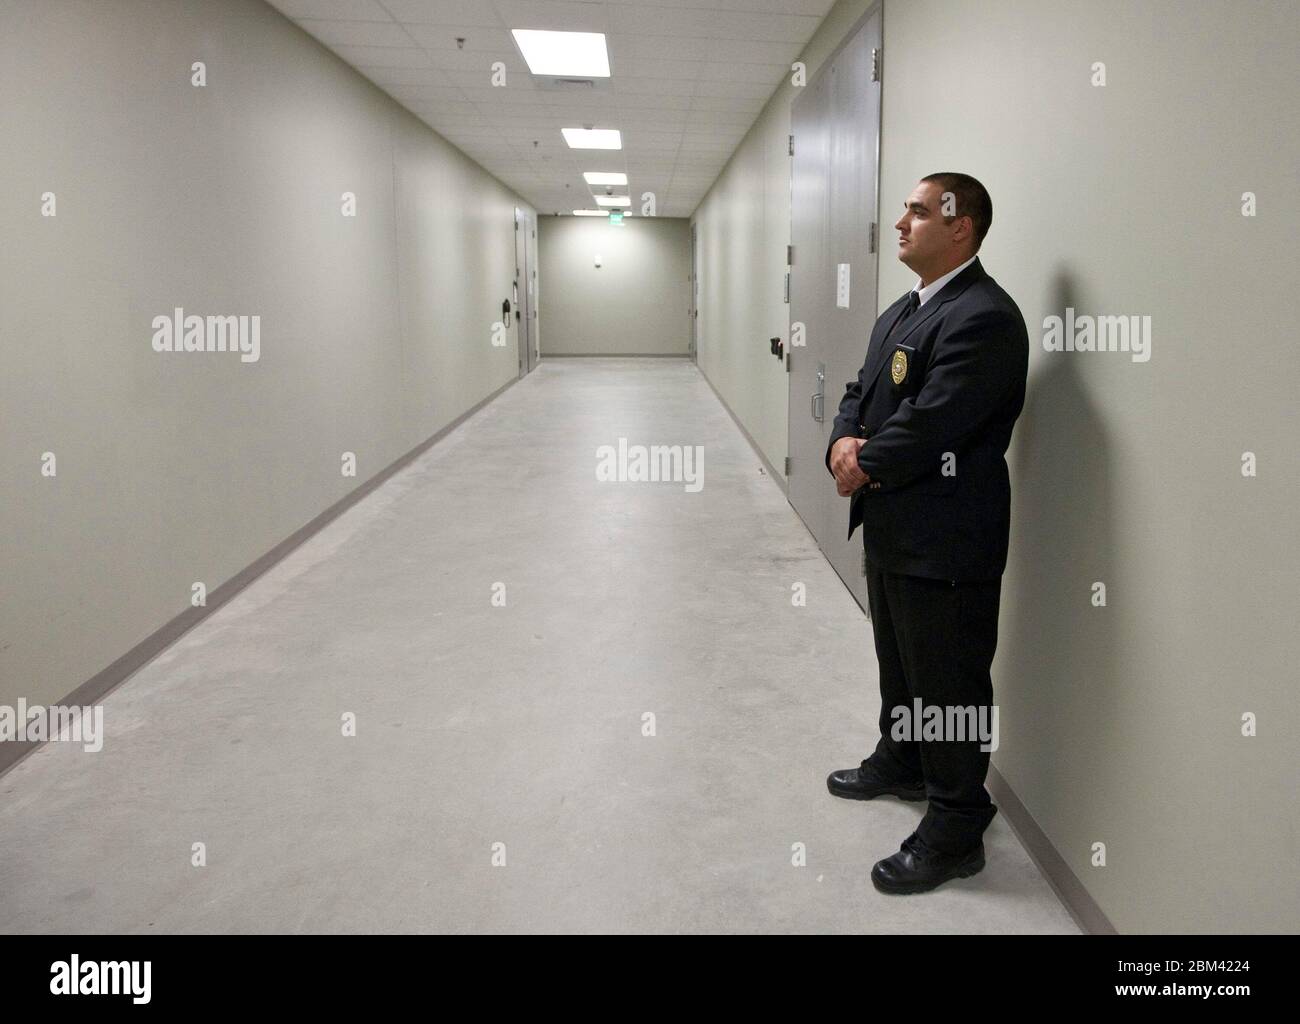 Bastrop Texas USA, November 10 , 2011: Security guard stands in empty hallway at electric power management facility. ©Marjorie Kamys Cotera/Daemmrich Photography Stock Photo